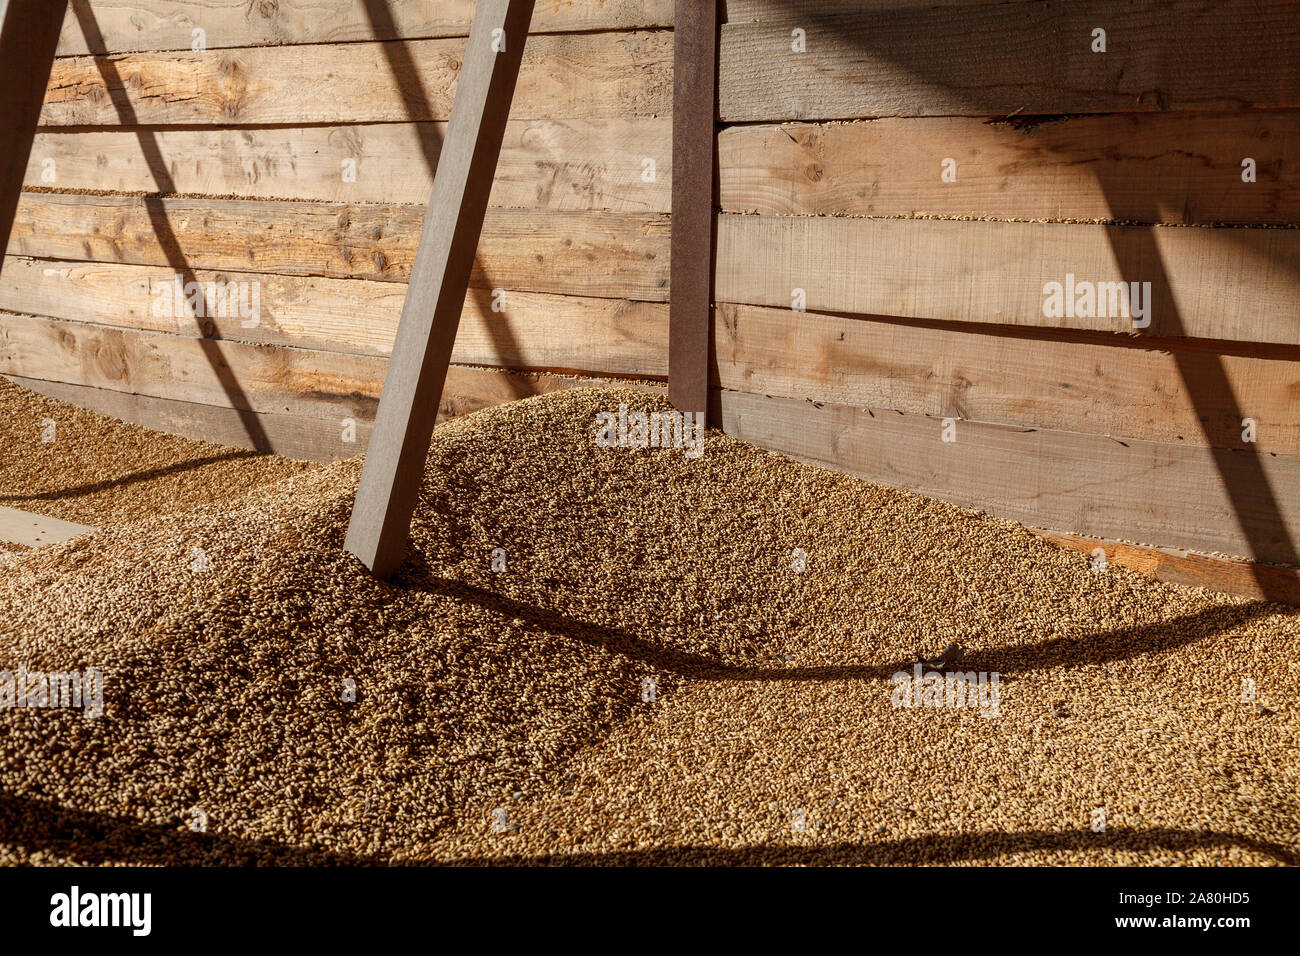 A pile of golden cereal grain stored agains a wooden plank wall with strong sunshine and shadows Stock Photo